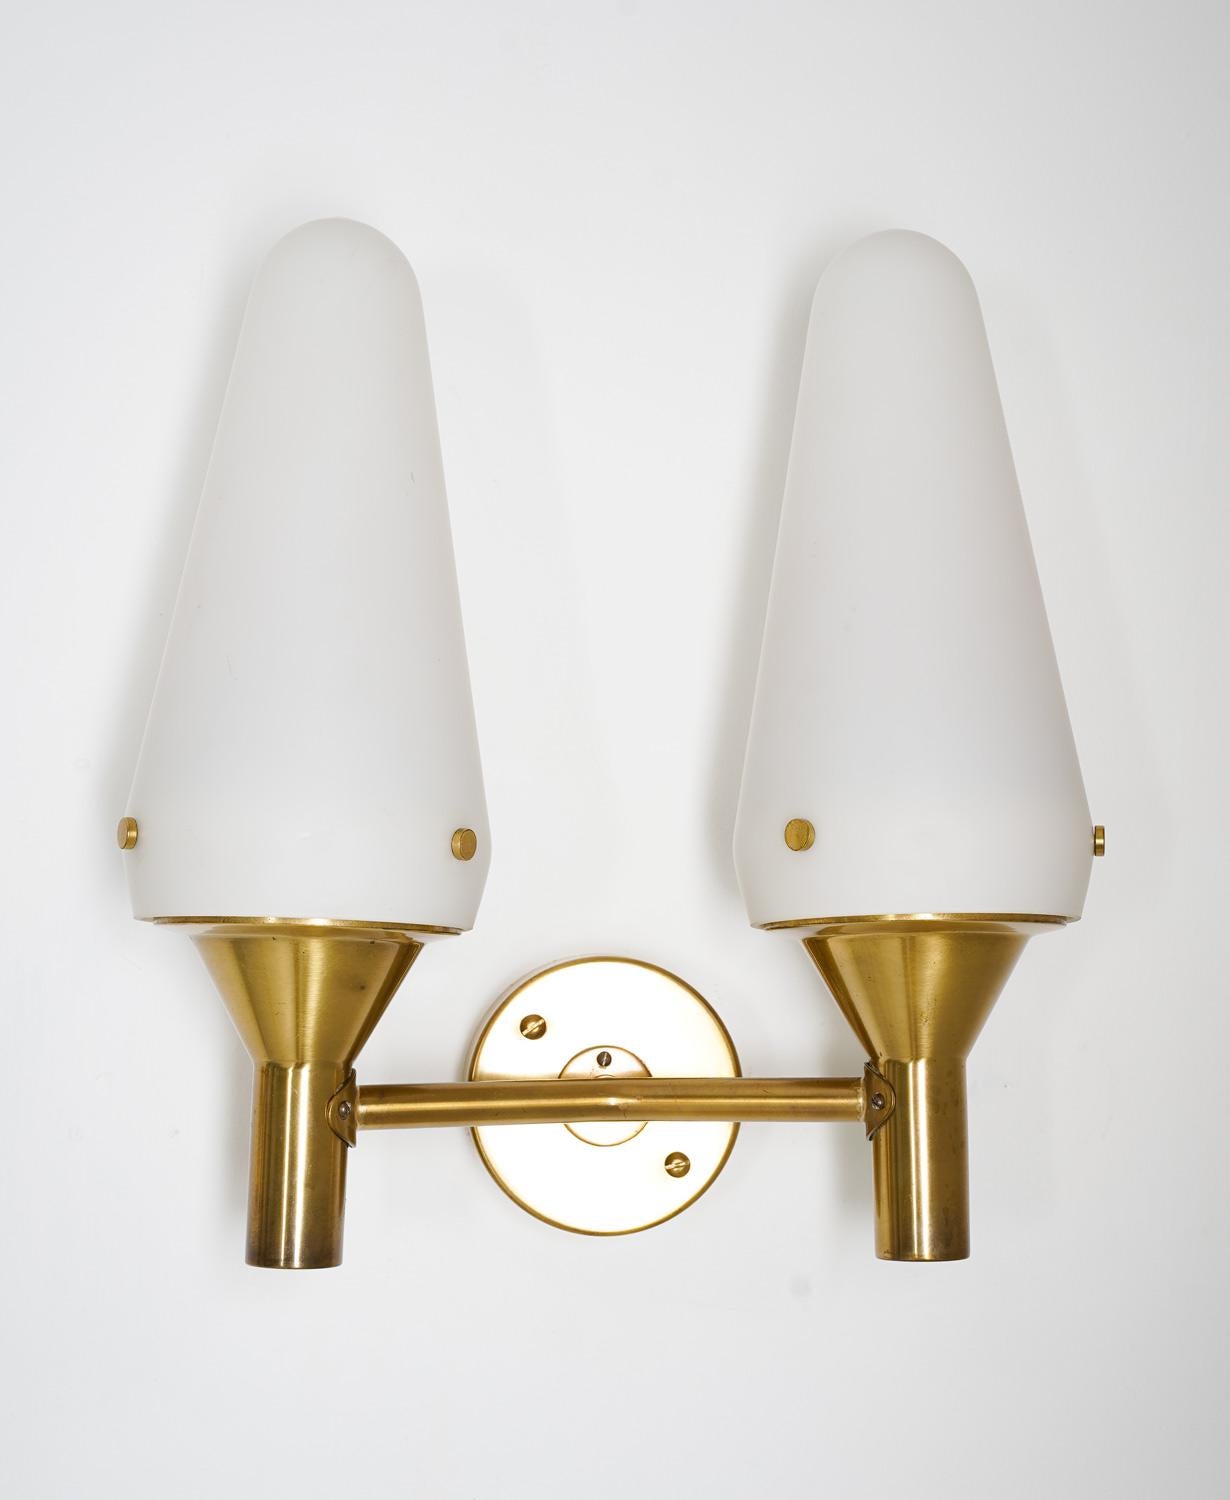 Pair of Swedish Midcentury Wall Lamps in Brass and Glass In Good Condition For Sale In Karlstad, SE